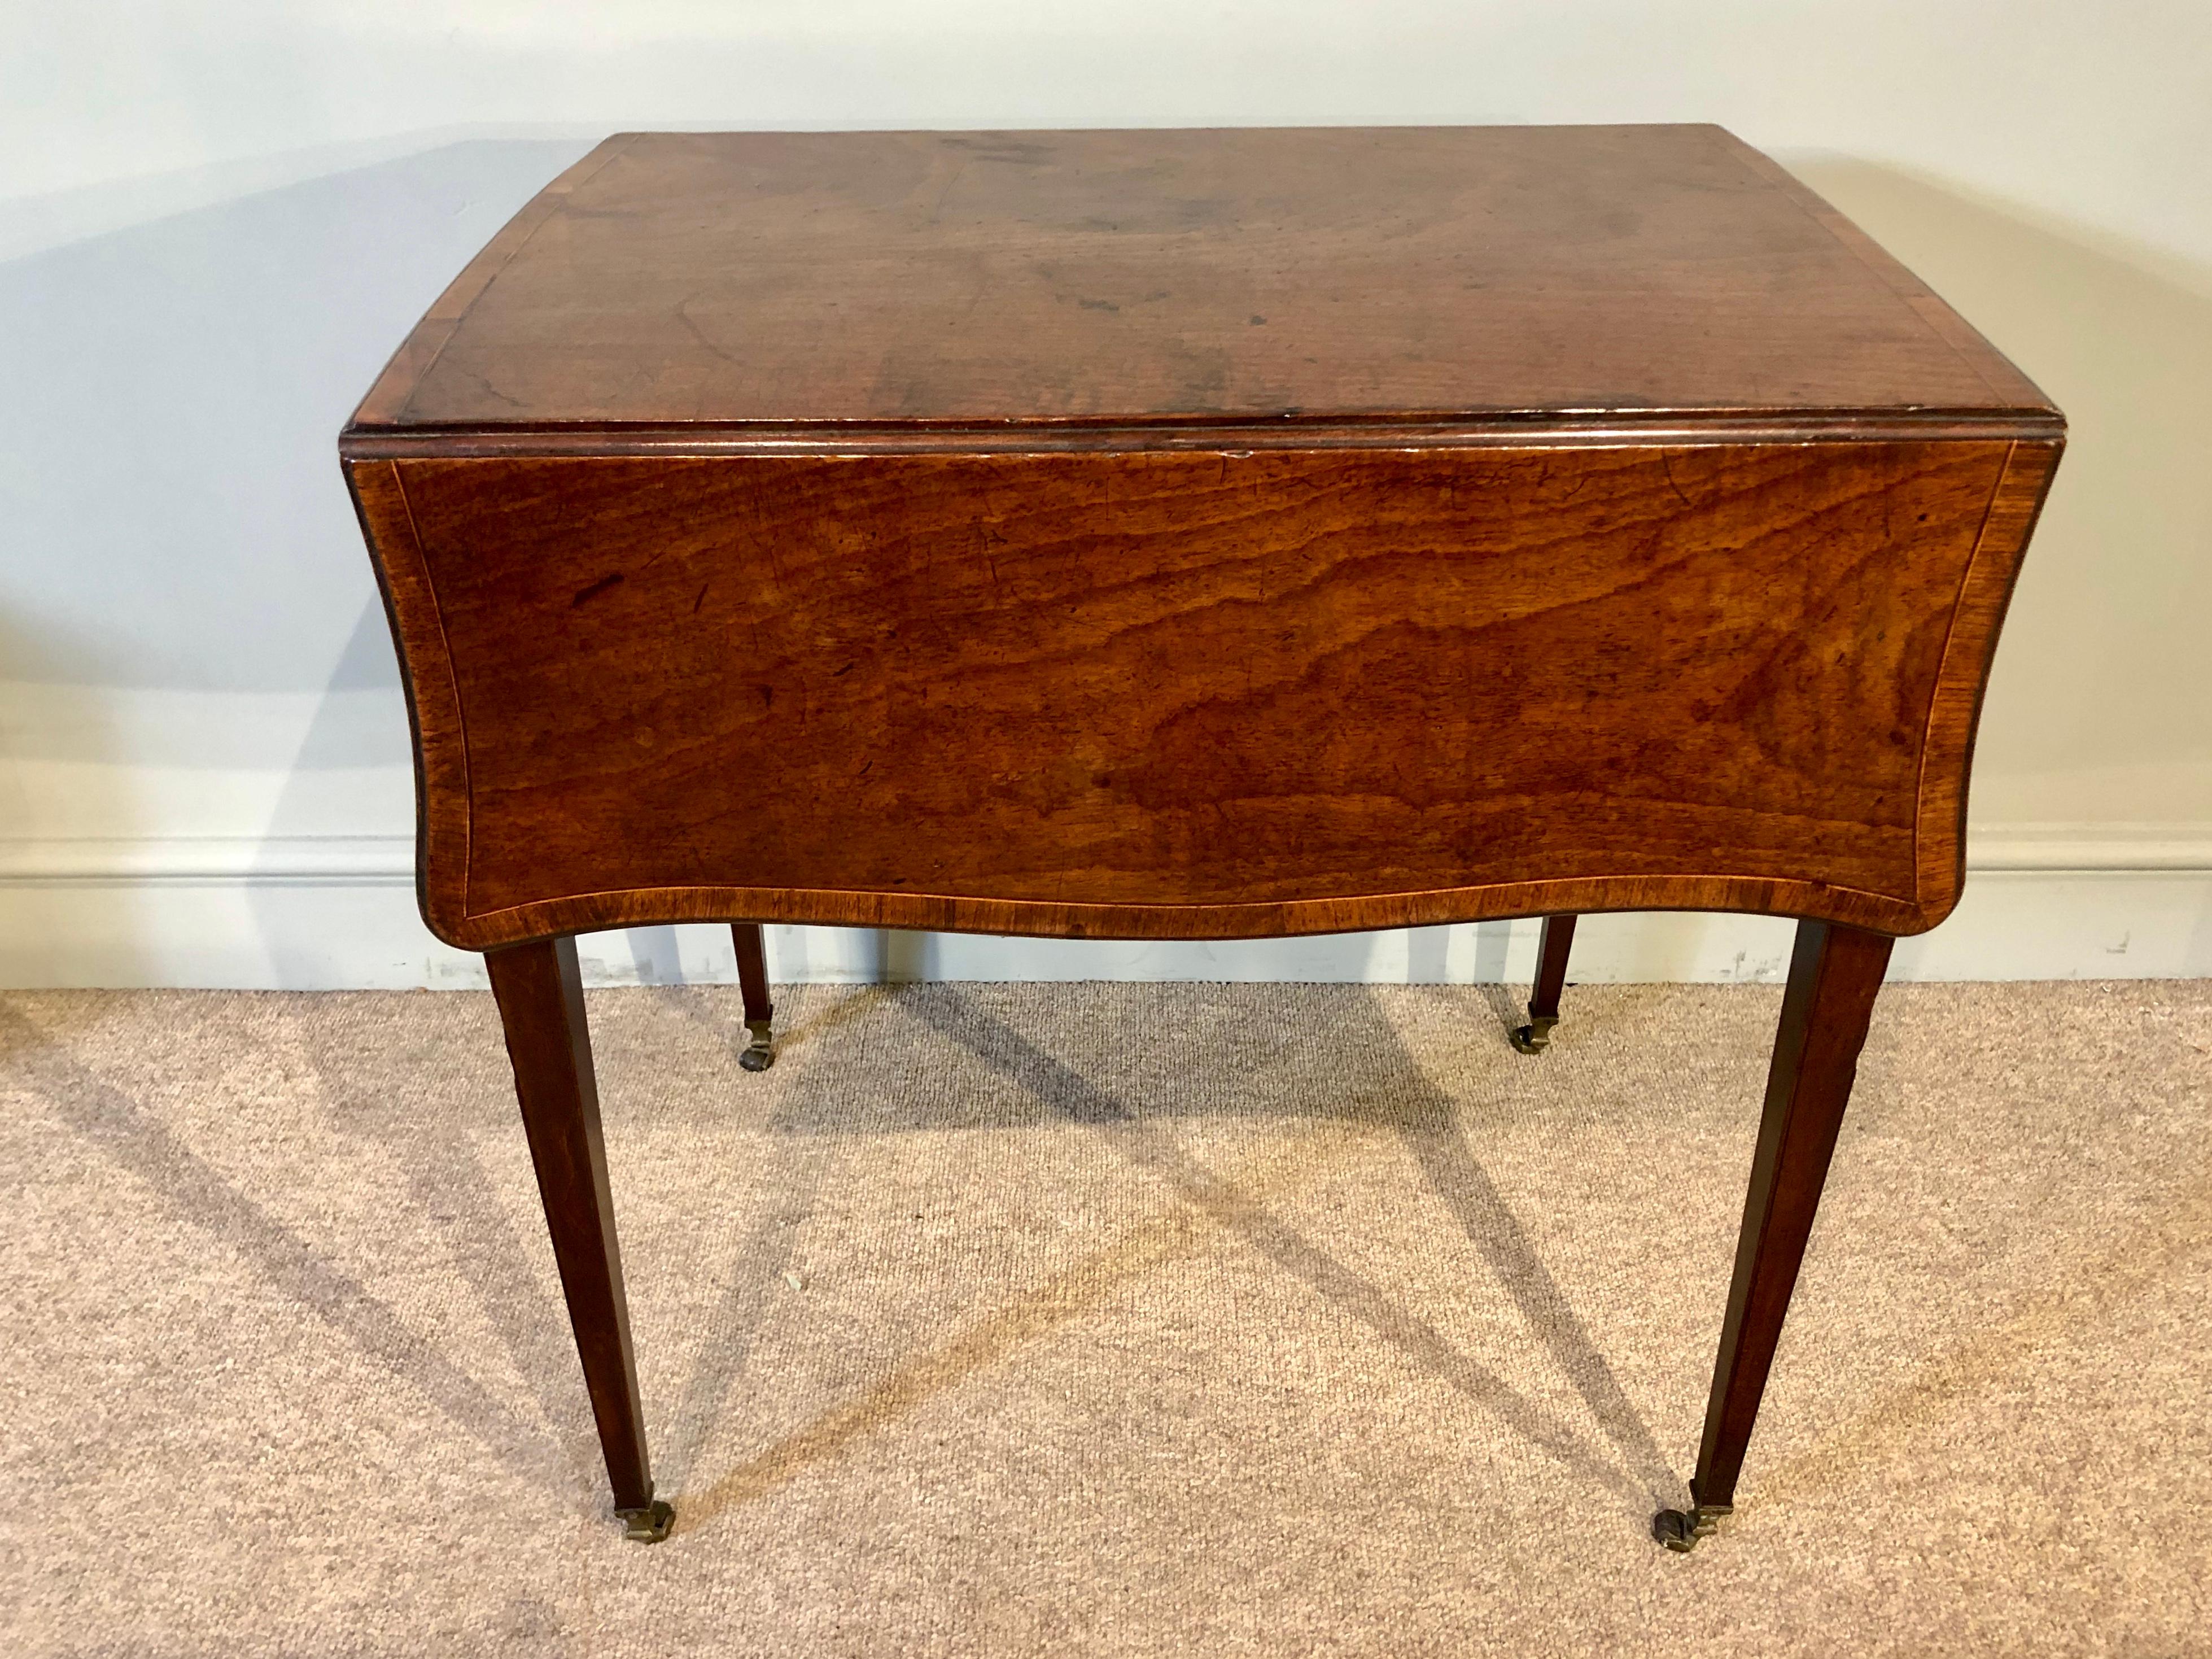 A very fine late 18th century beautifully figured Hepplewhite fiddleback mahogany butterfly Pembroke table of exceptional color and patina. Original handles throughout, a deep drawer to one side and dummy drawer to the other. The elegant square